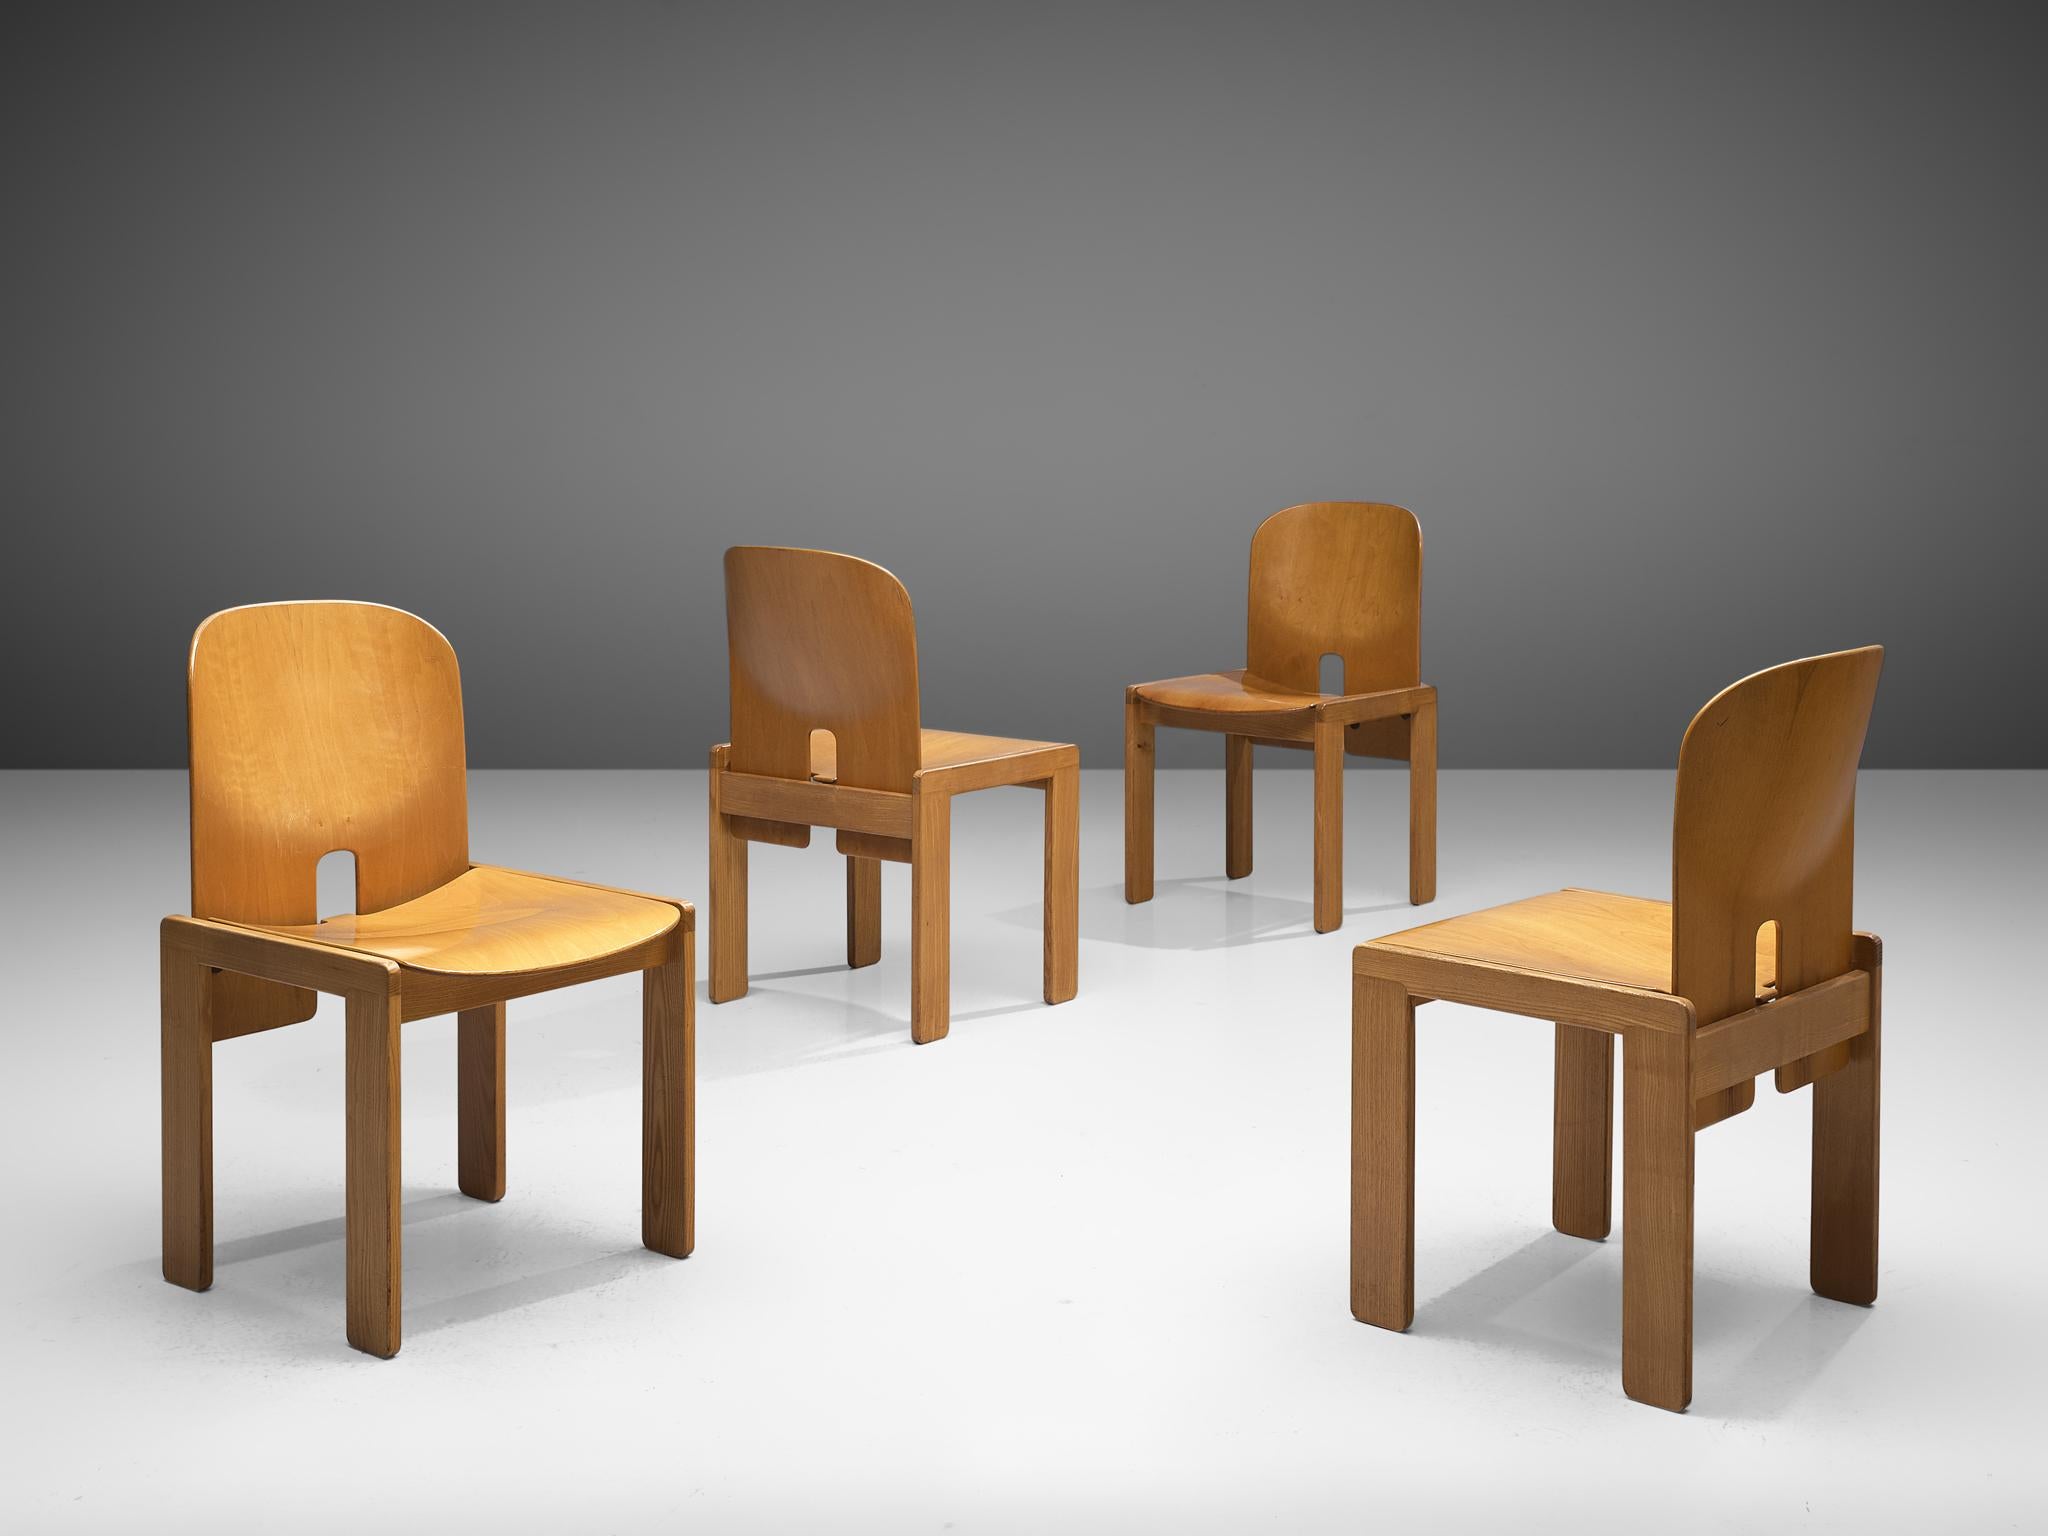 Afra and Tobia Scarpa for Cassina, set of four chairs model 121, maple and ash, Italy, design 1965, production later

Set of four chairs by the Italian designer couple Tobia and Afra Scarpa. These chairs have a cubic and architectural appearance.